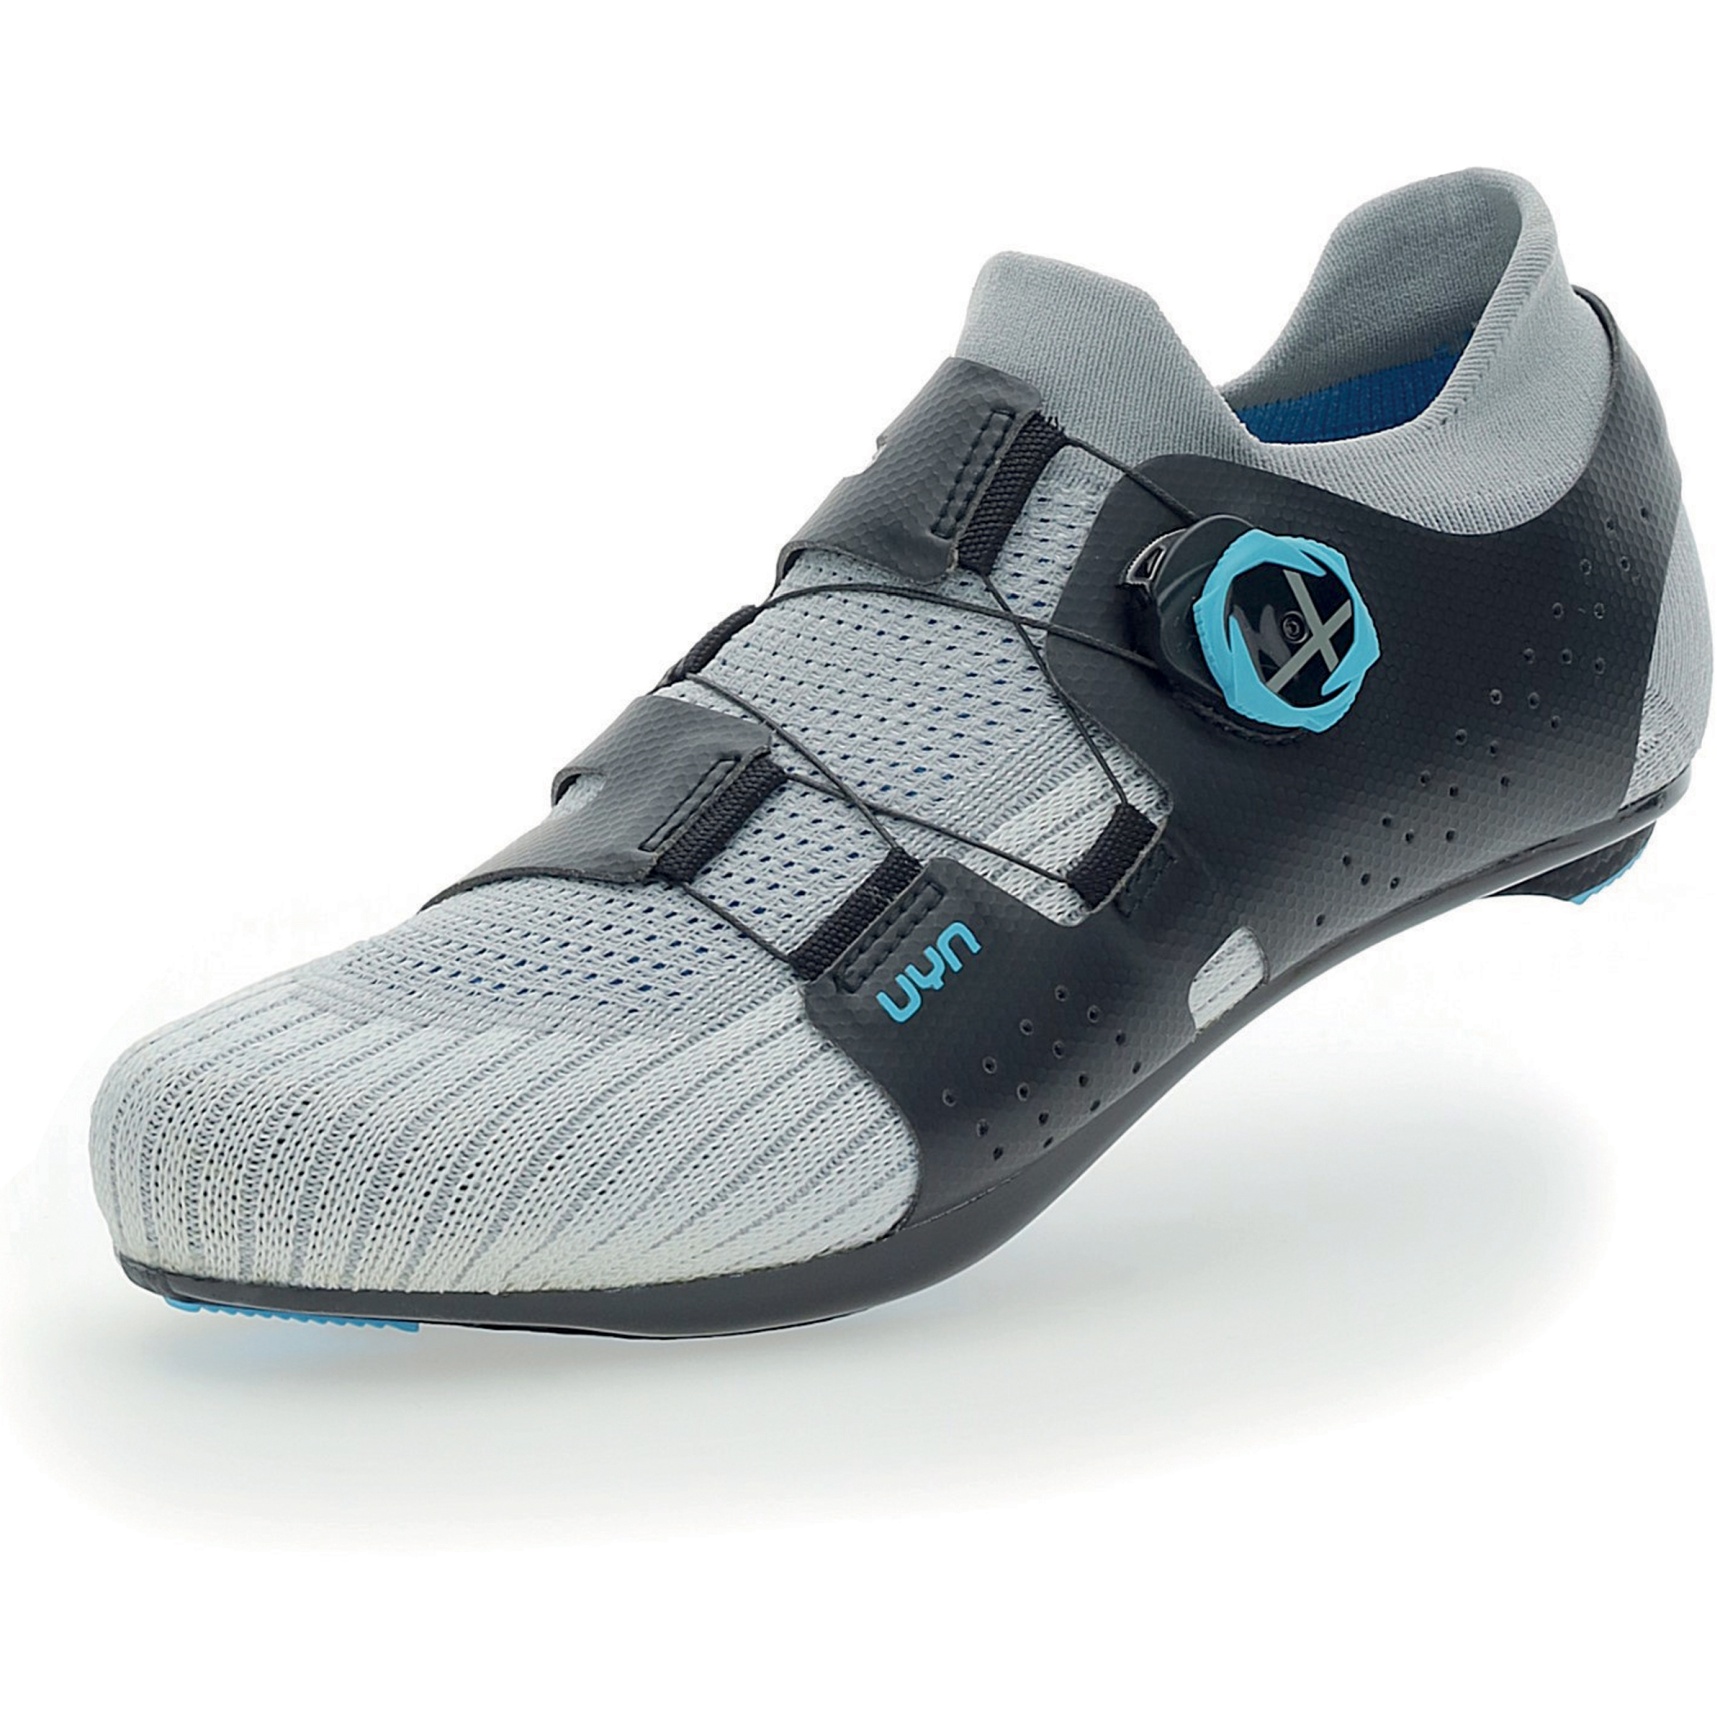 Picture of UYN Naked Full-Carbon Road Bike Shoes - Silver/Blue - 2nd Choice